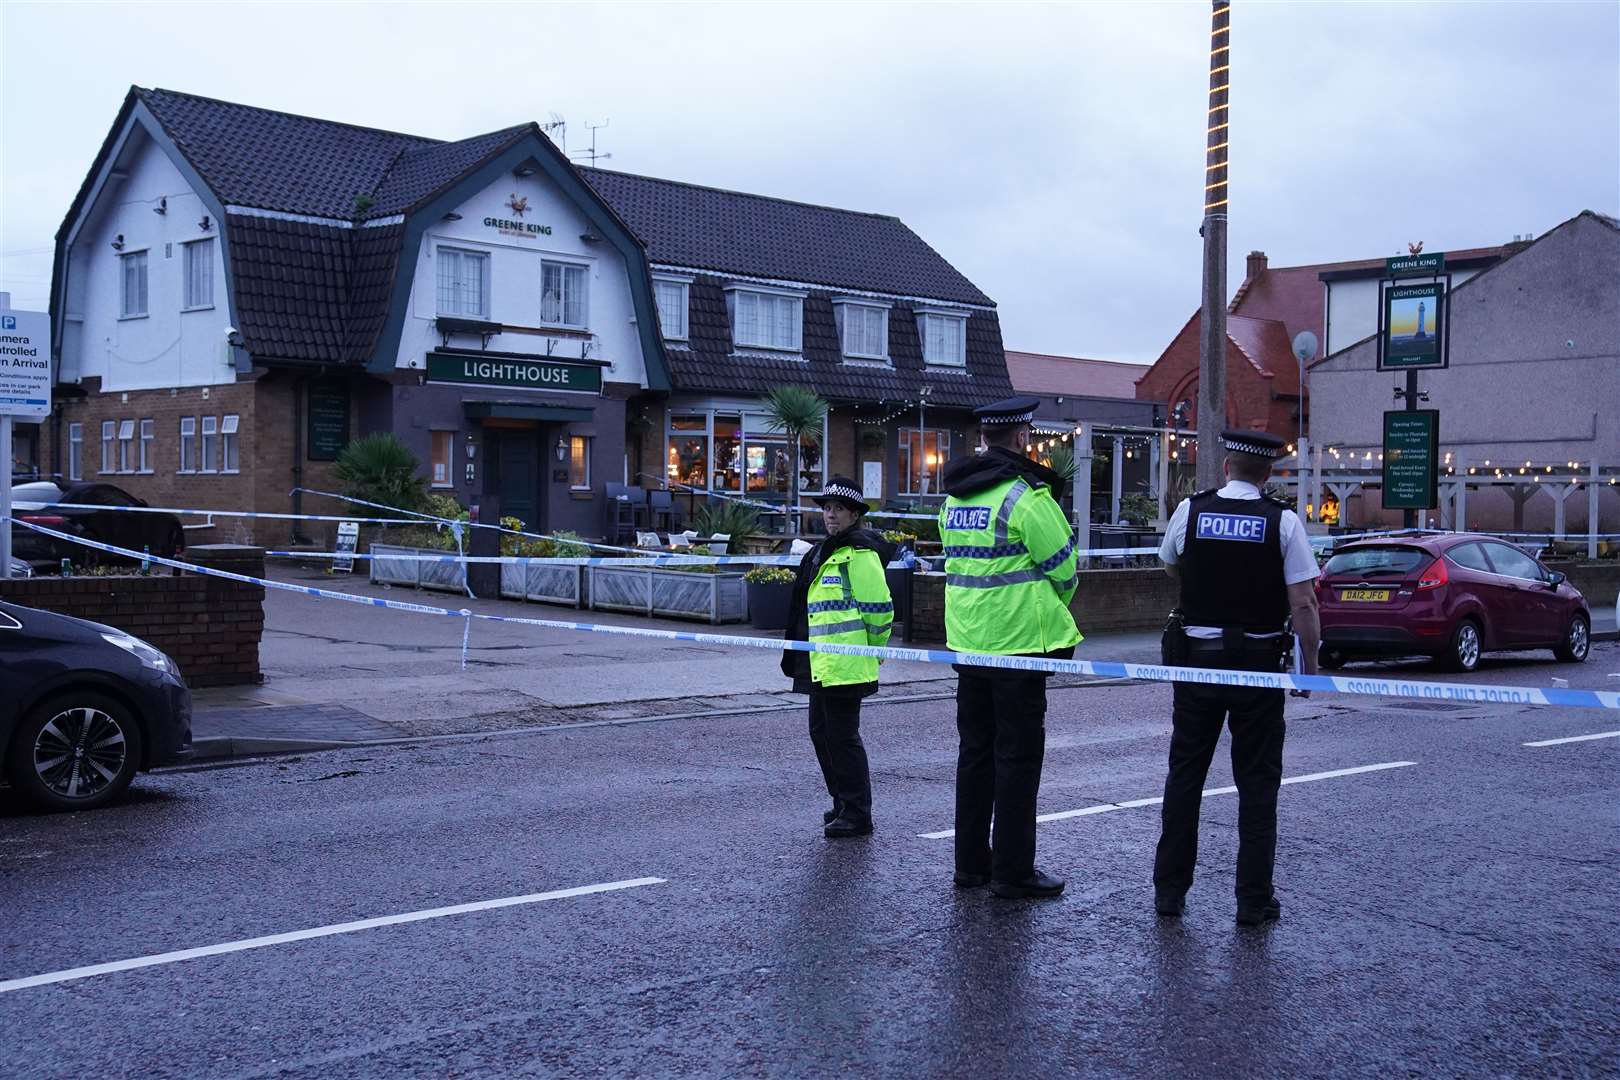 Police officers guarding the scene of the killing at the Lighthouse Inn (Peter Byrne/PA)